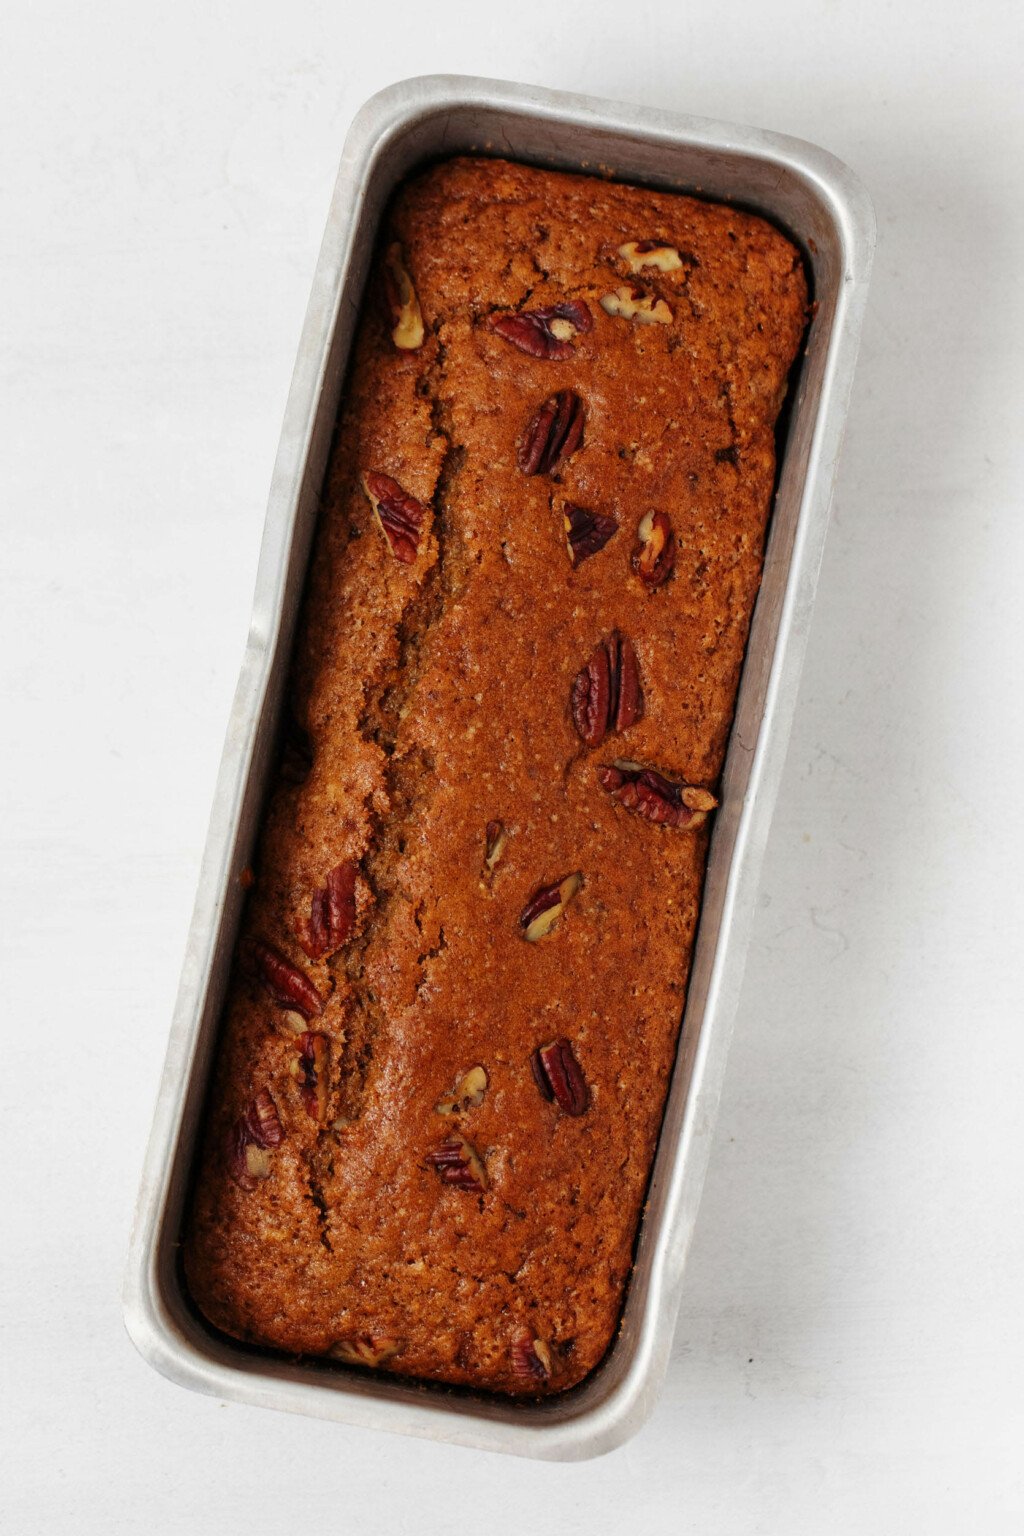 A metal baking loaf has recently been used to prepare a vegan quick bread. The bread is studded with pieces of pecan.